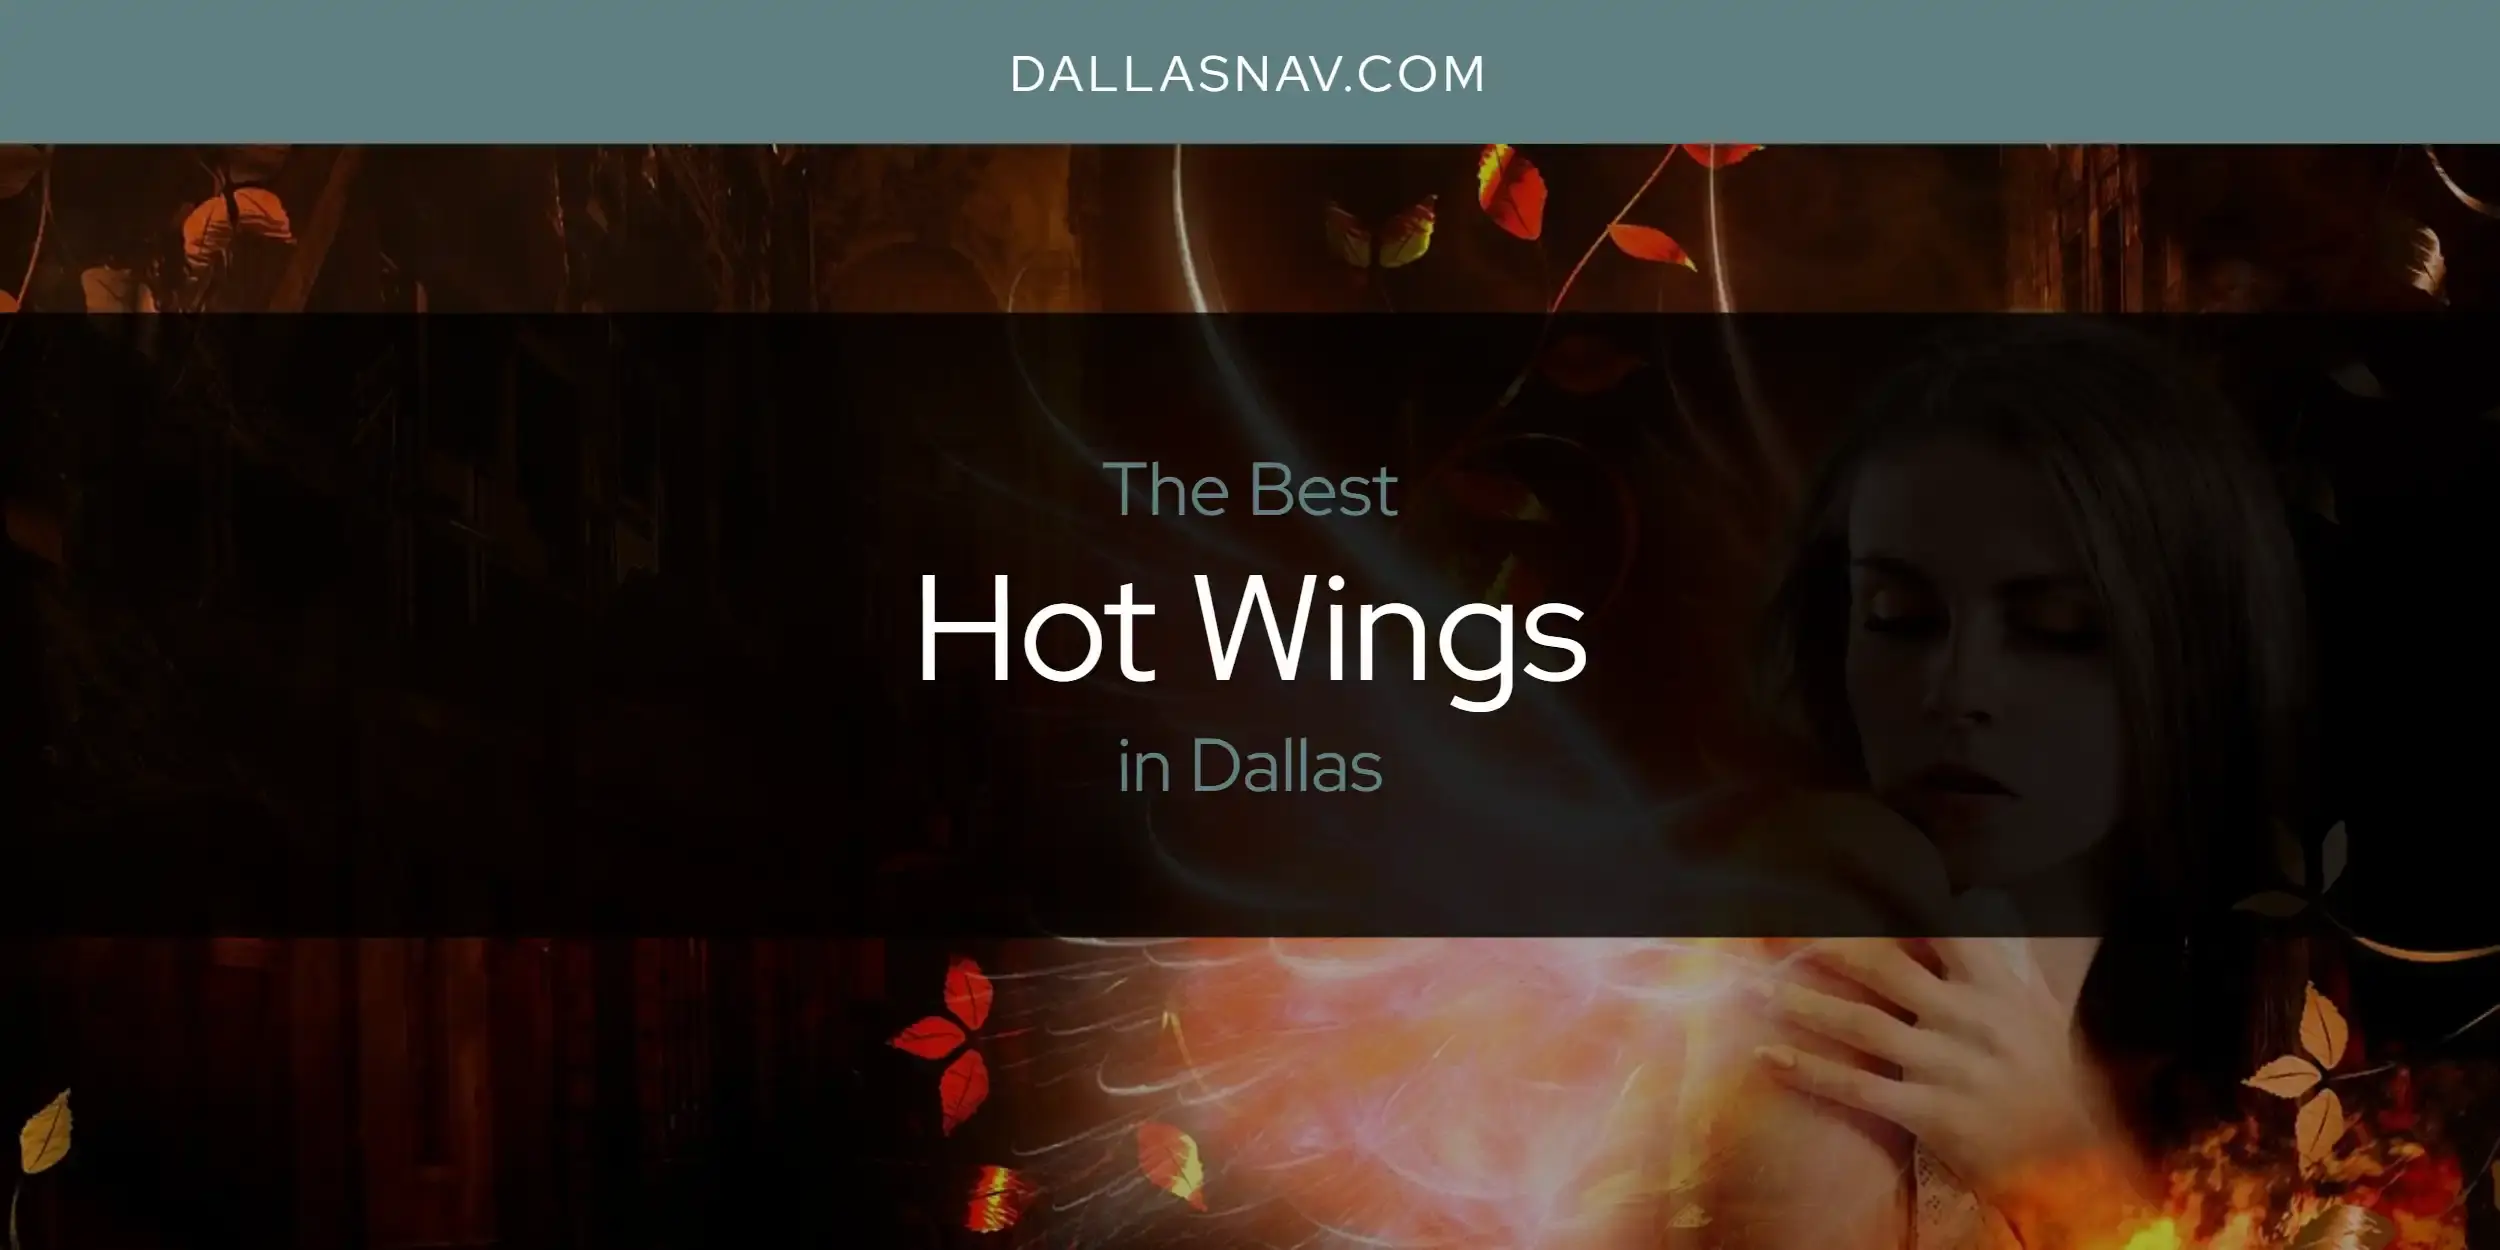 Best Hot Wings in Dallas? Here's the Top 6